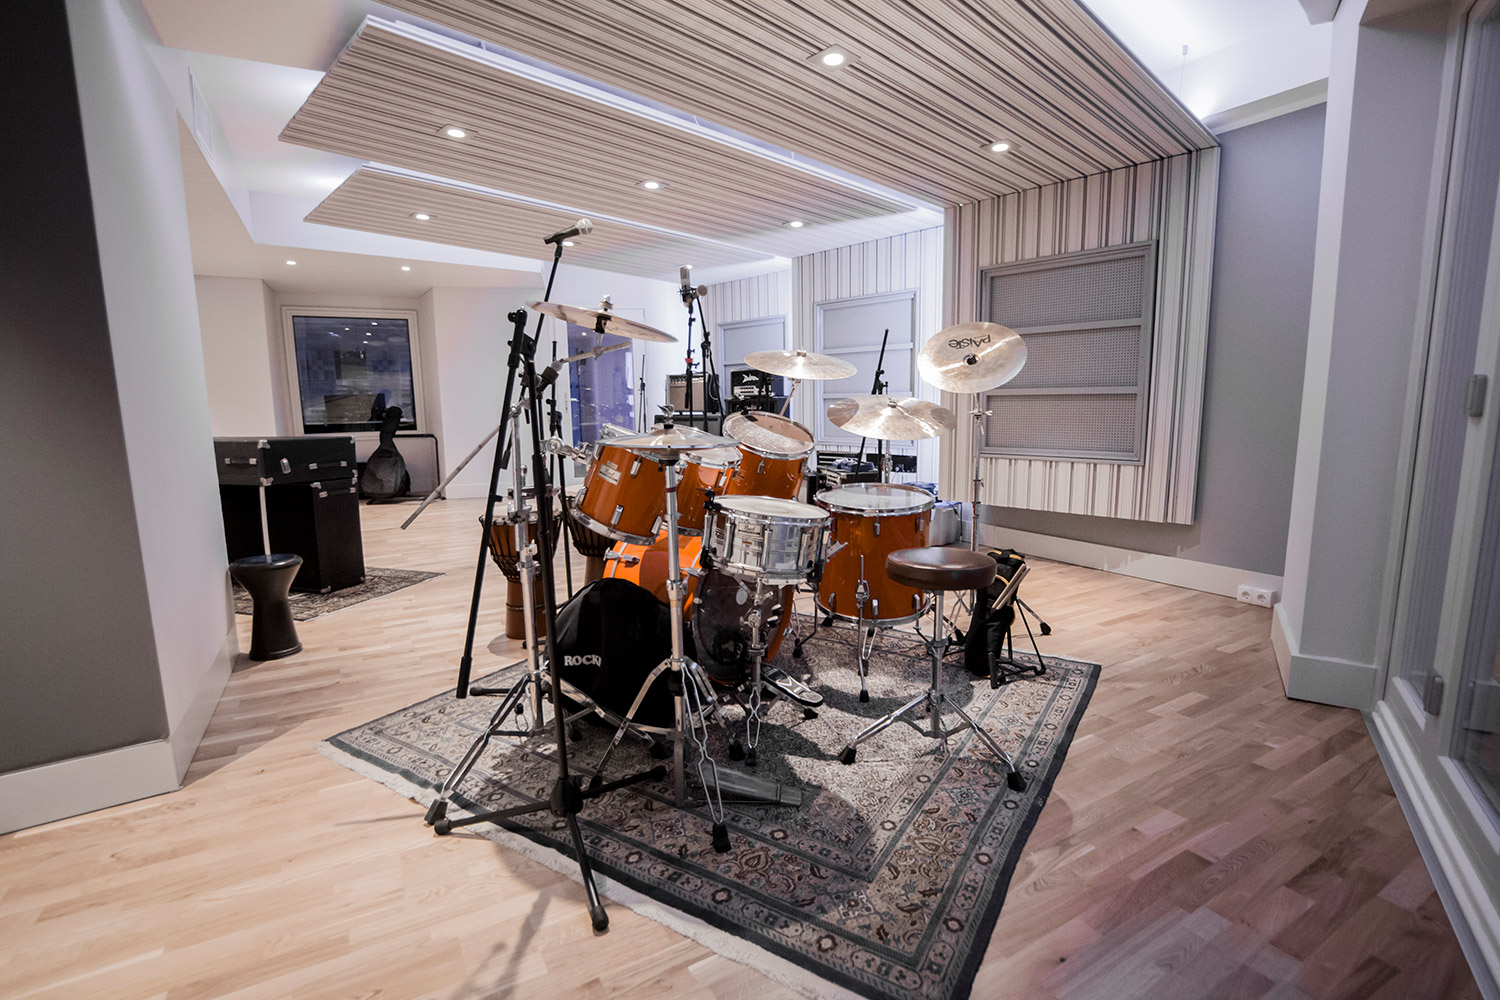 Vienna City Sound is a twelve-room recording studio built in the basement of a vintage commercial building in the heart of Vienna. Owner Peter Zimmerl’s retained the services of WSDG to design his dream studio. Live Room.